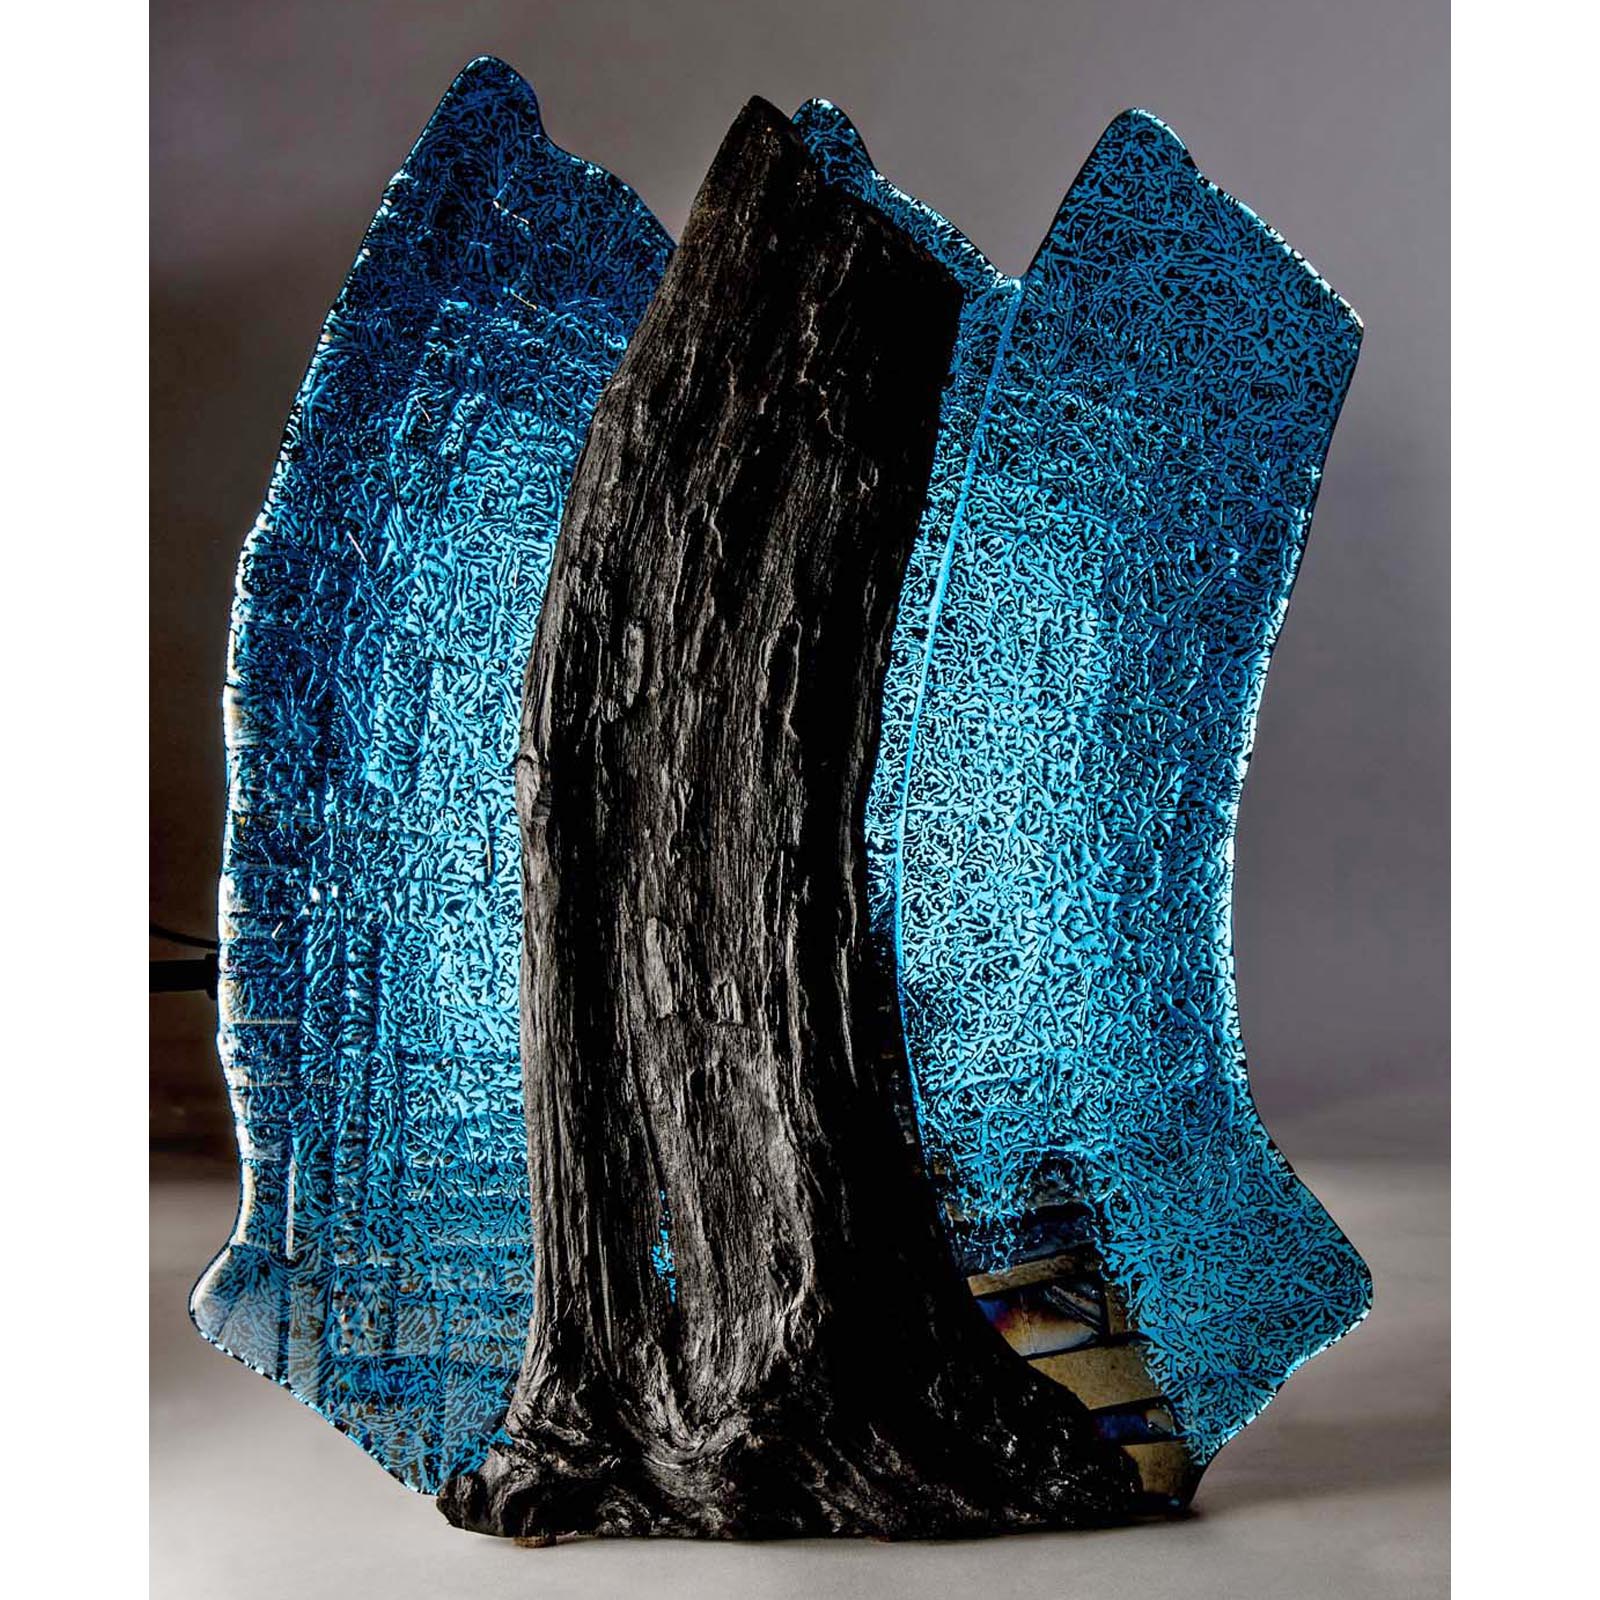 Glass sculpture in Irish bogwood entitled juxtaposition in light - contemporary glassware hand made in Ireland by Keith Sheppard Glass Artistry, Northern Ireland